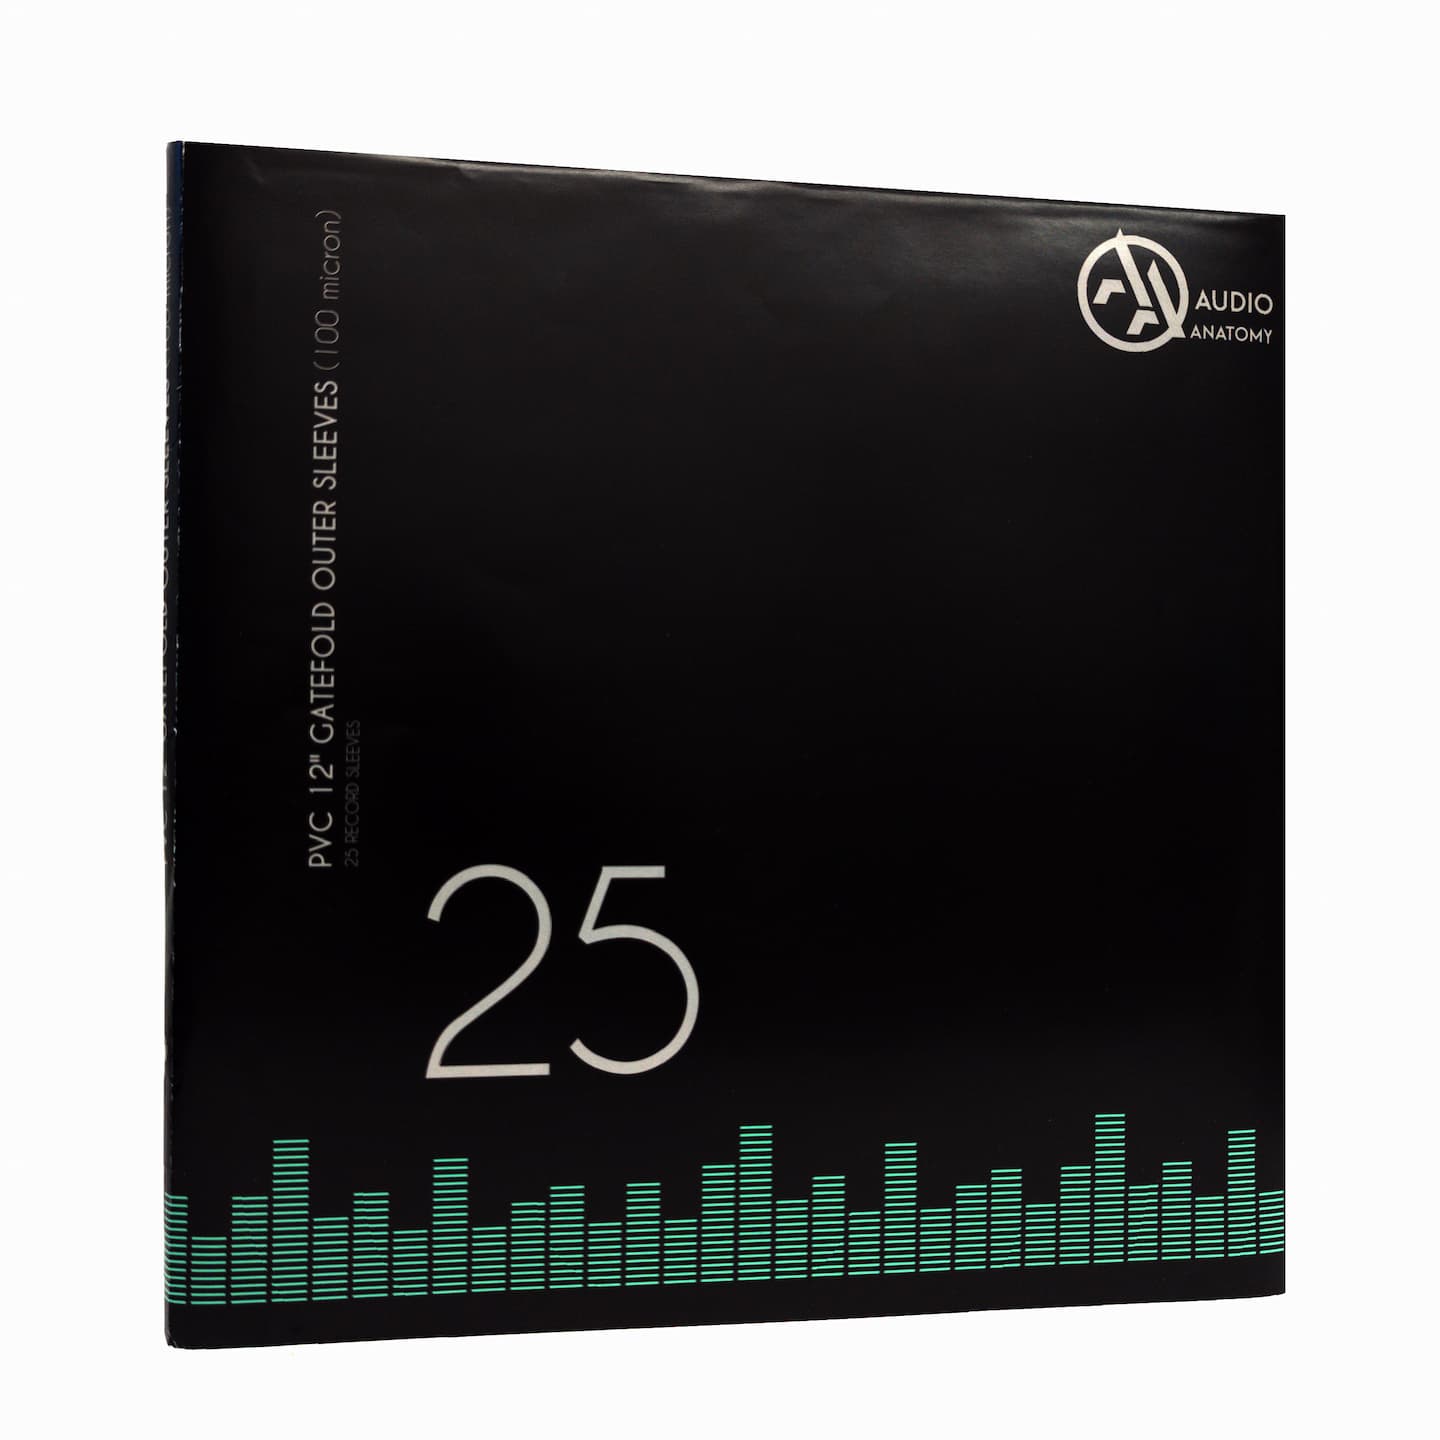 PVC Gatefold Outer Sleeve 25 pieces